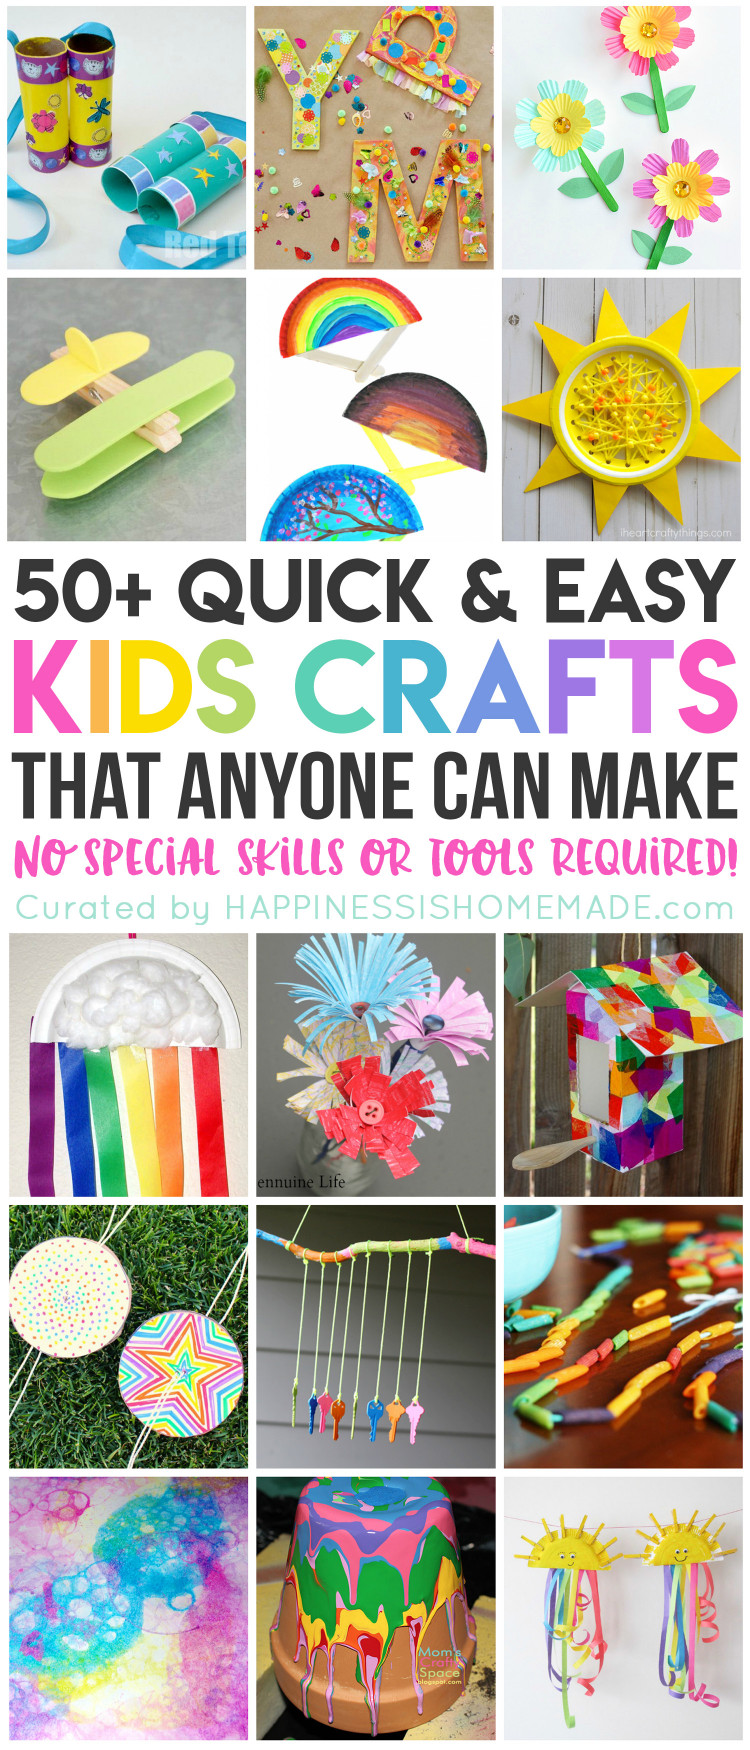 Fun And Easy Crafts For Kids
 50 Quick & Easy Kids Crafts that ANYONE Can Make